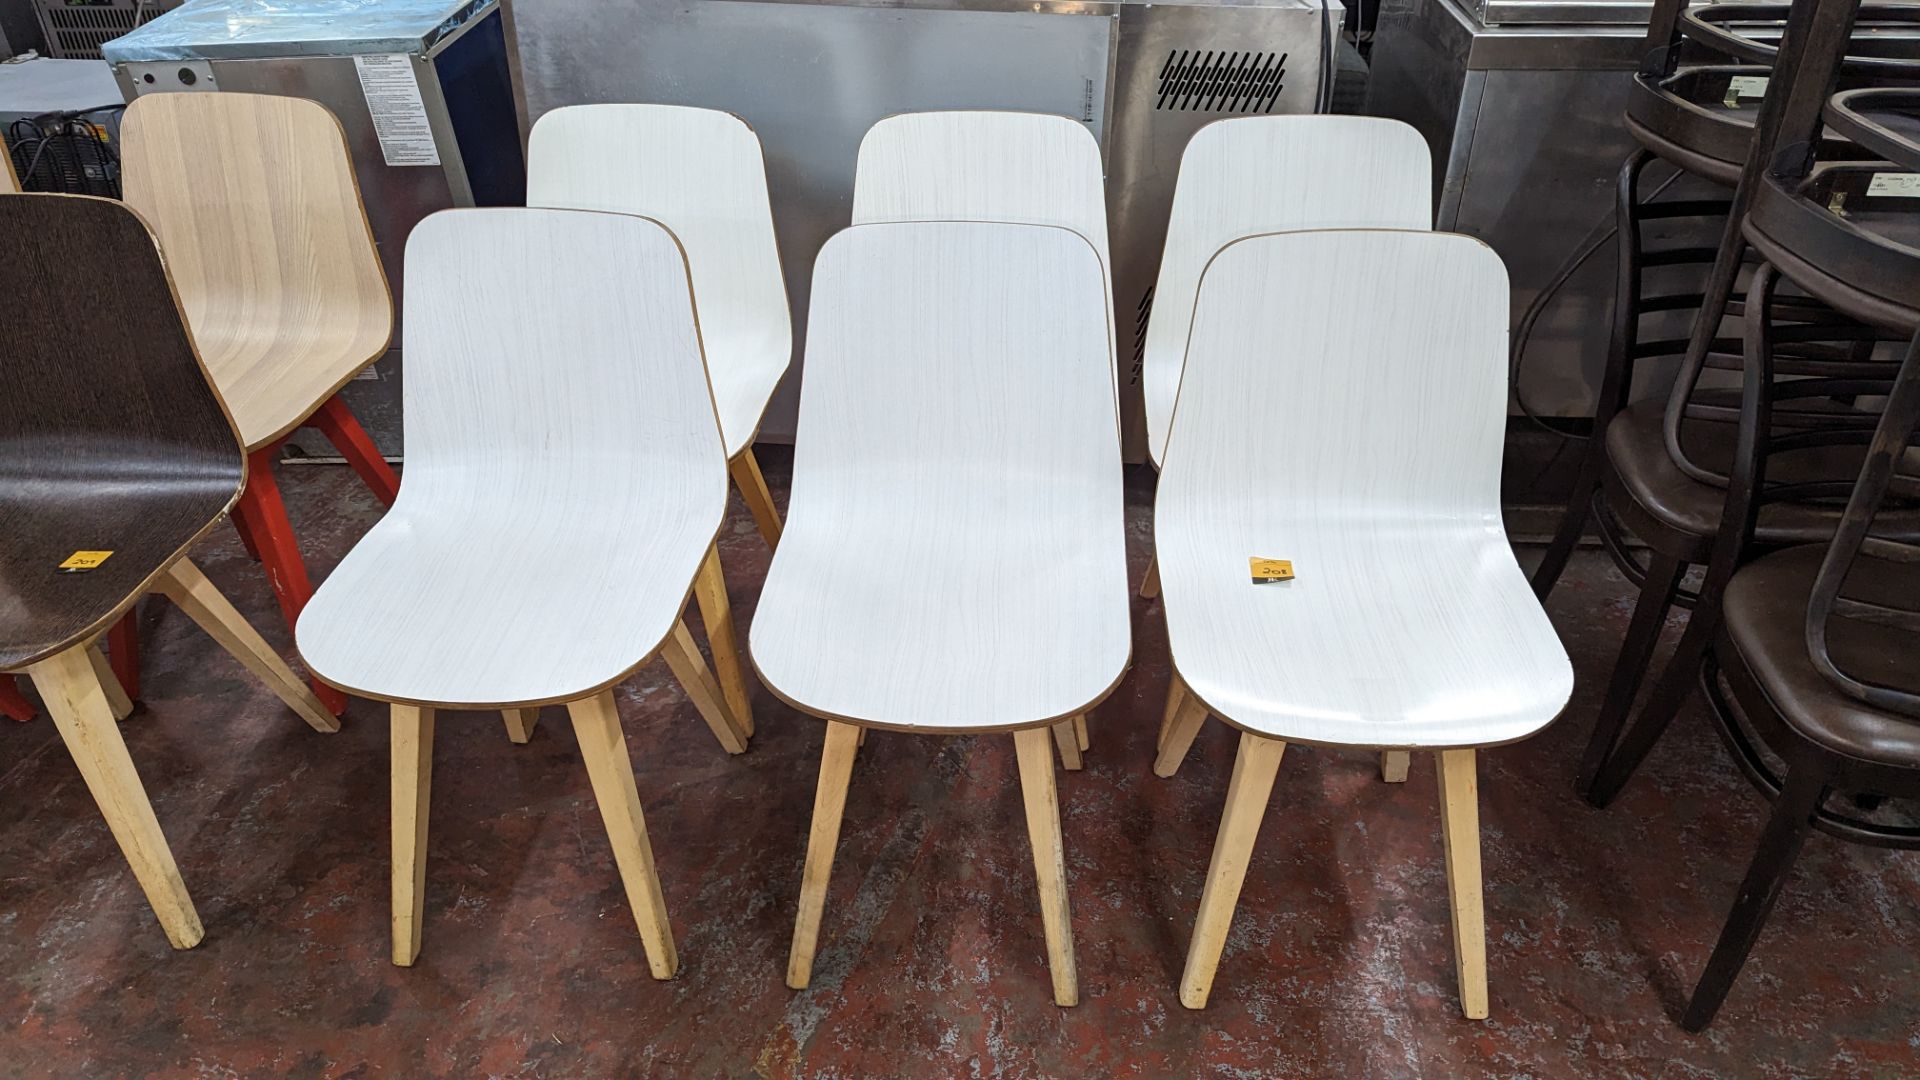 6 matching wooden chairs with white painted bases. NB these chairs look the same style, but a diffe